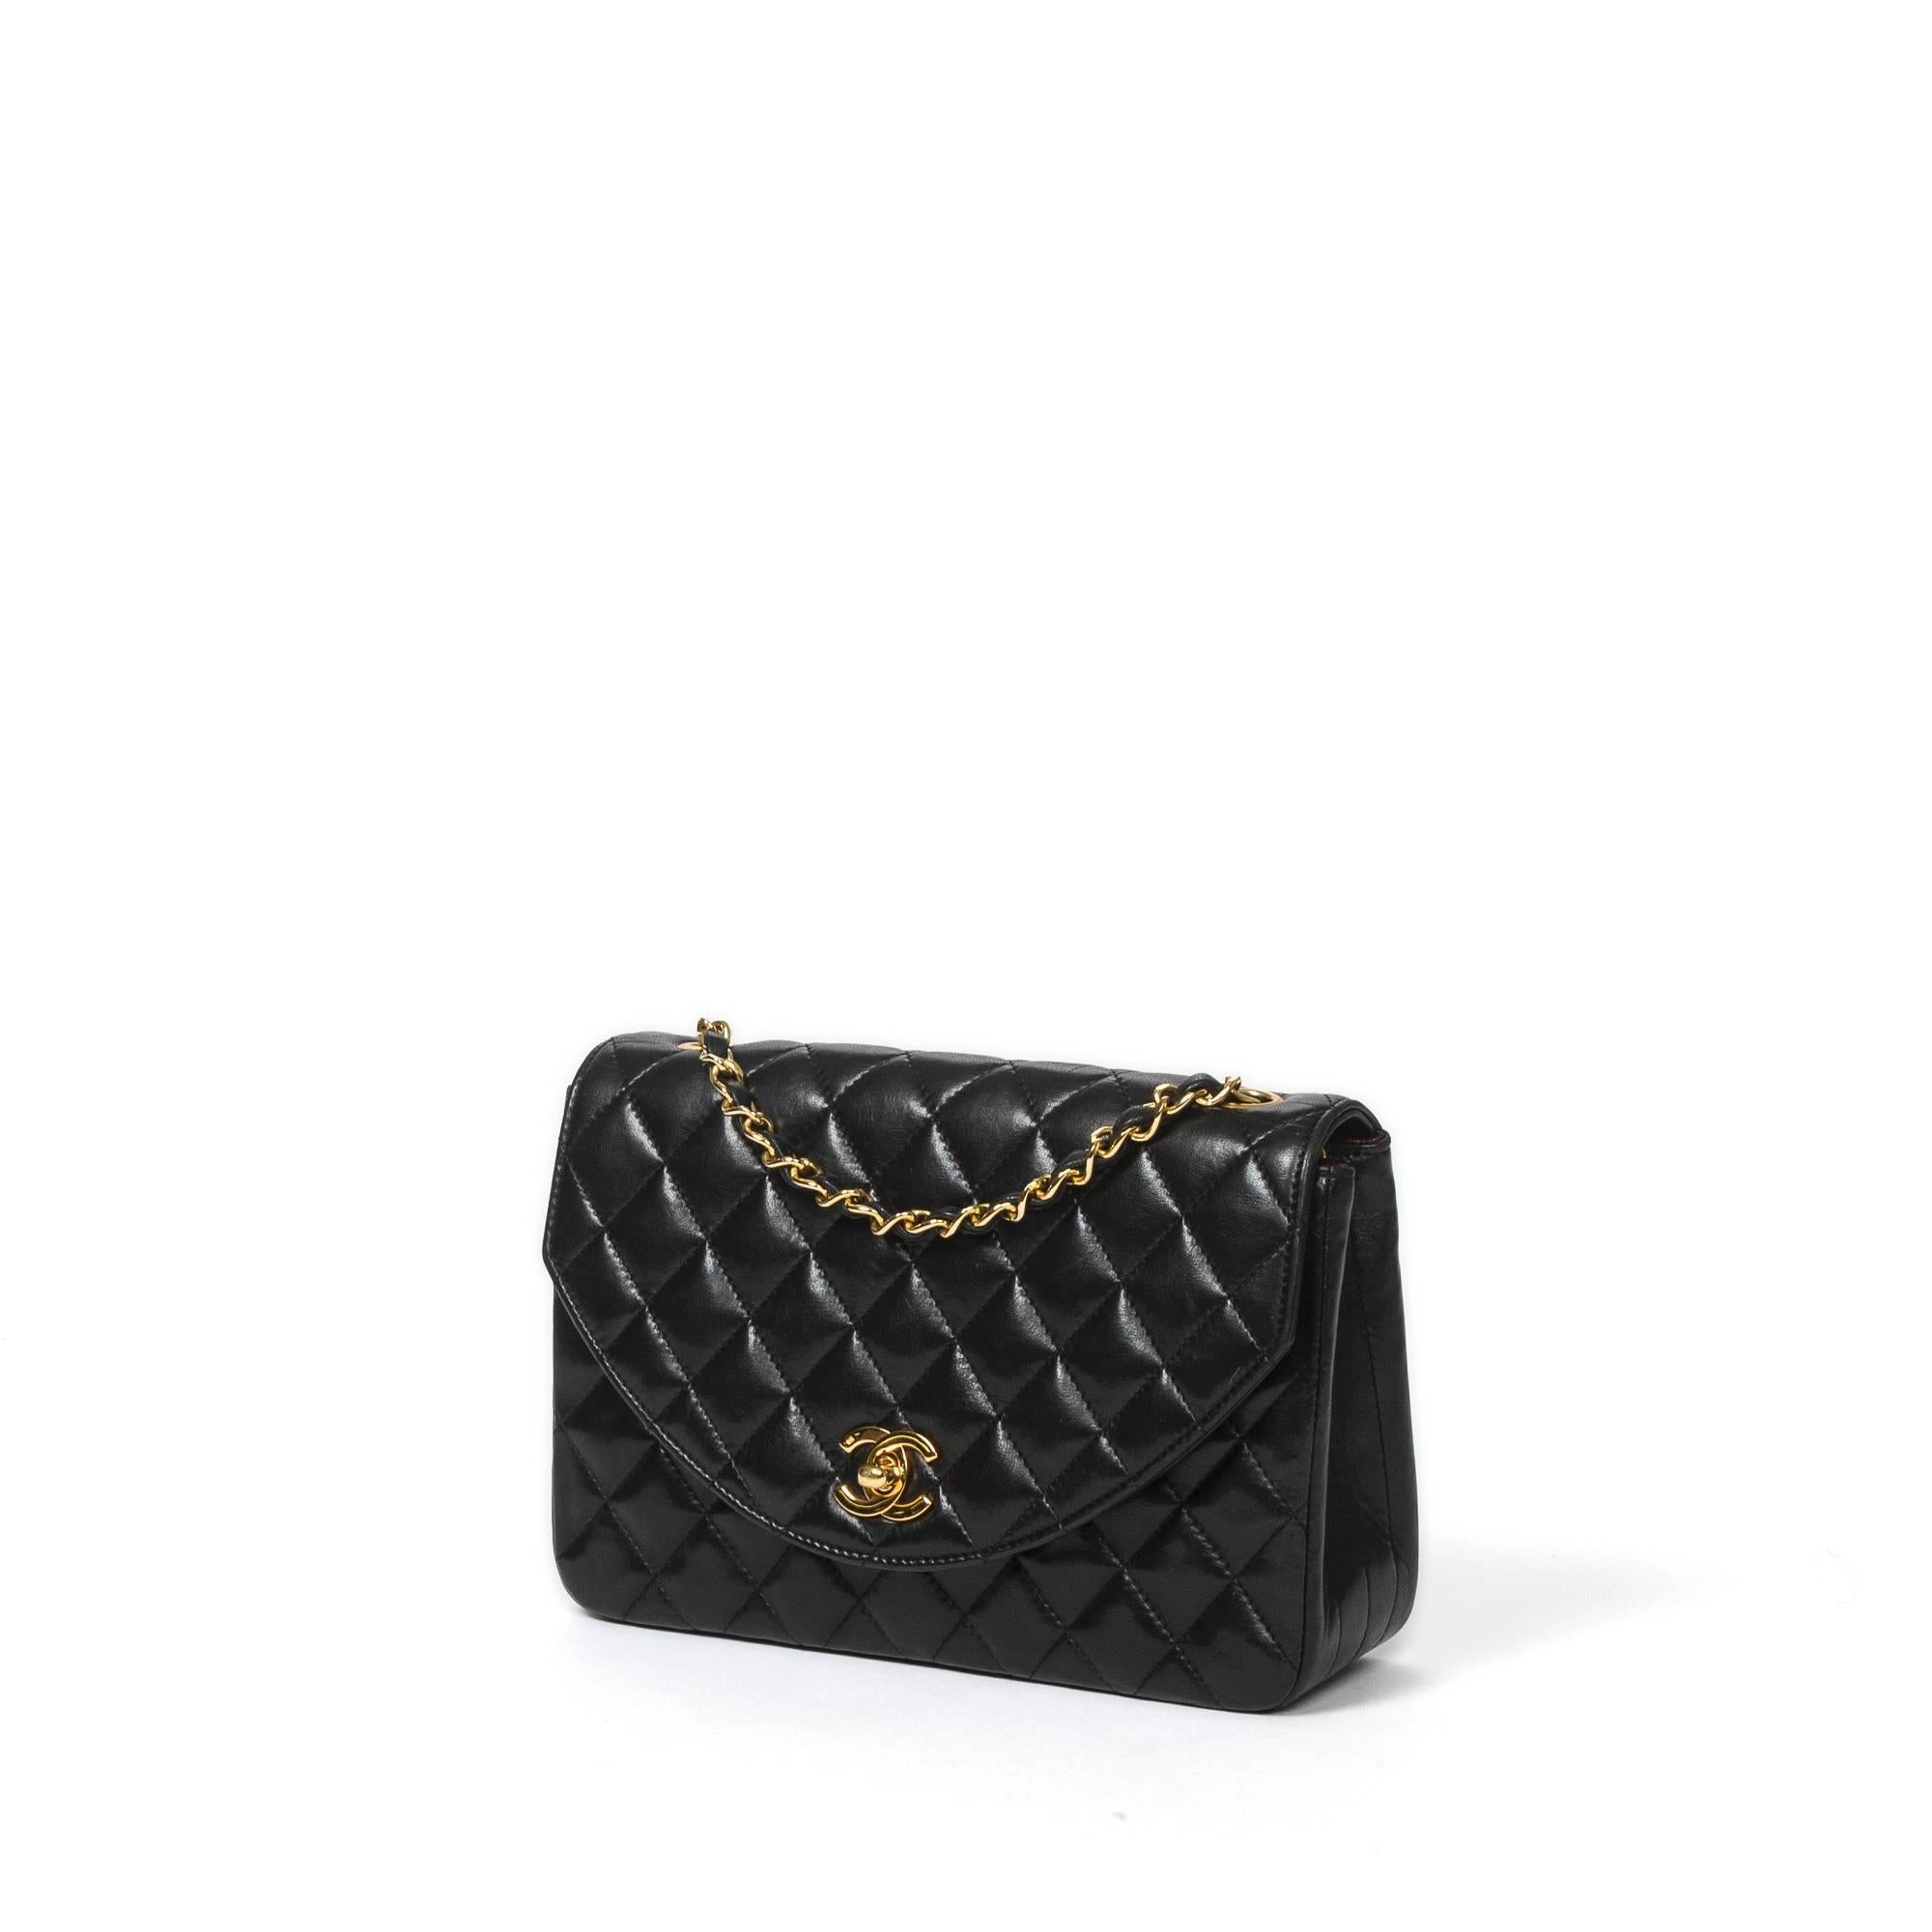 Chanel Vintage single flap 23cm shoulder bag in black quilted leather with single chain strap interlaced with black leather (49cm), CC turnlock and hardware in gold tone. Burgundy leather lined interior with 2 pockets which one is zipped. 
This bag